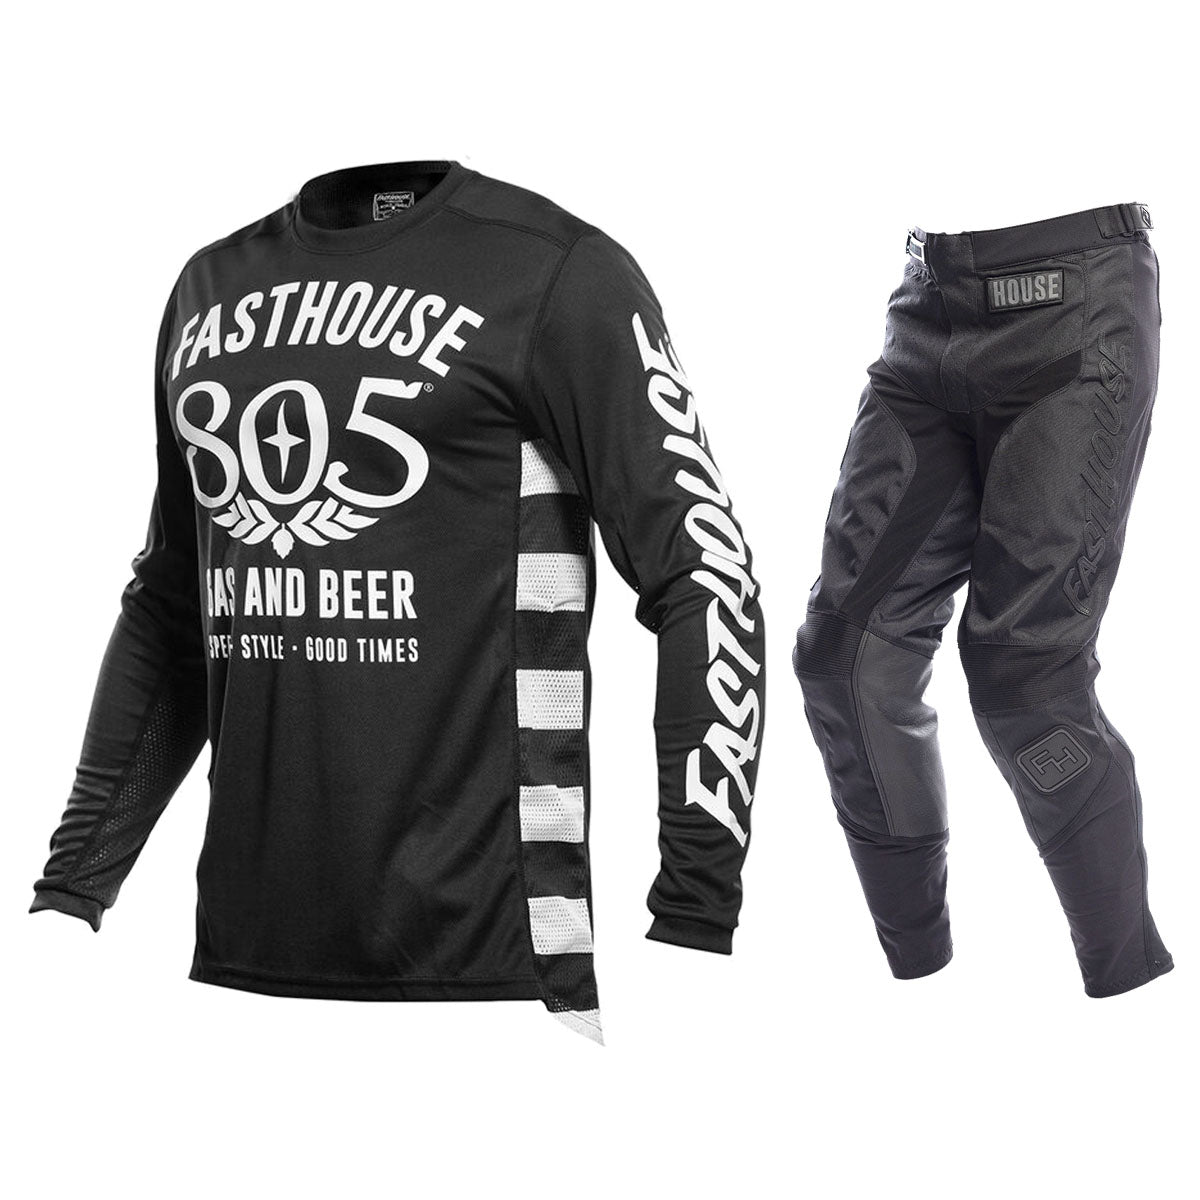 Fasthouse 805 Gas & Beer Newhall Gearset / Jersey & Pant Combo - Black/White